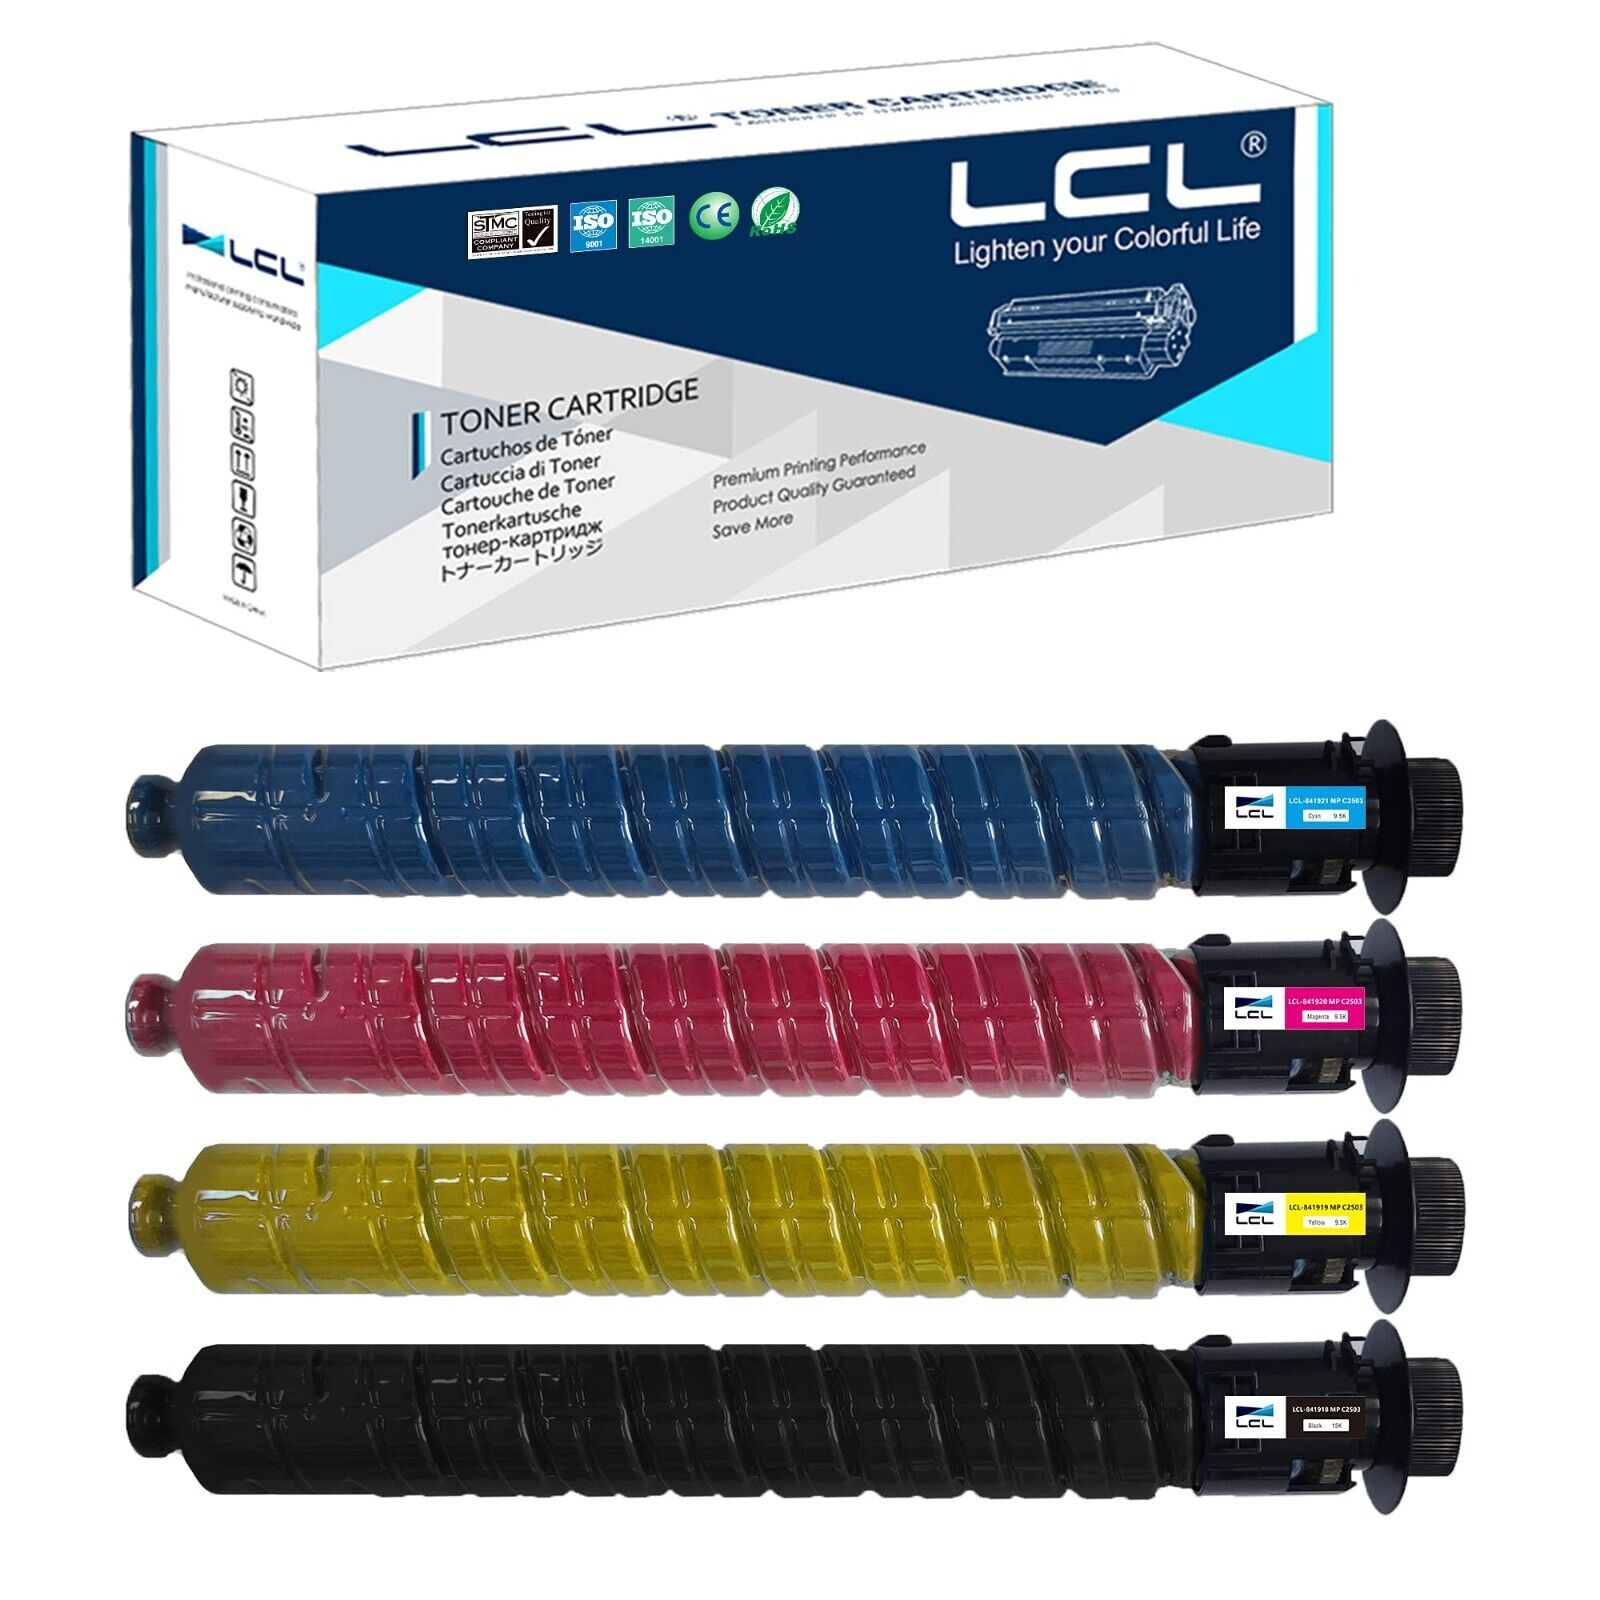 LCL Compatible Toner Cartridge Replacement for Ricoh 841918 841921 841920 841919